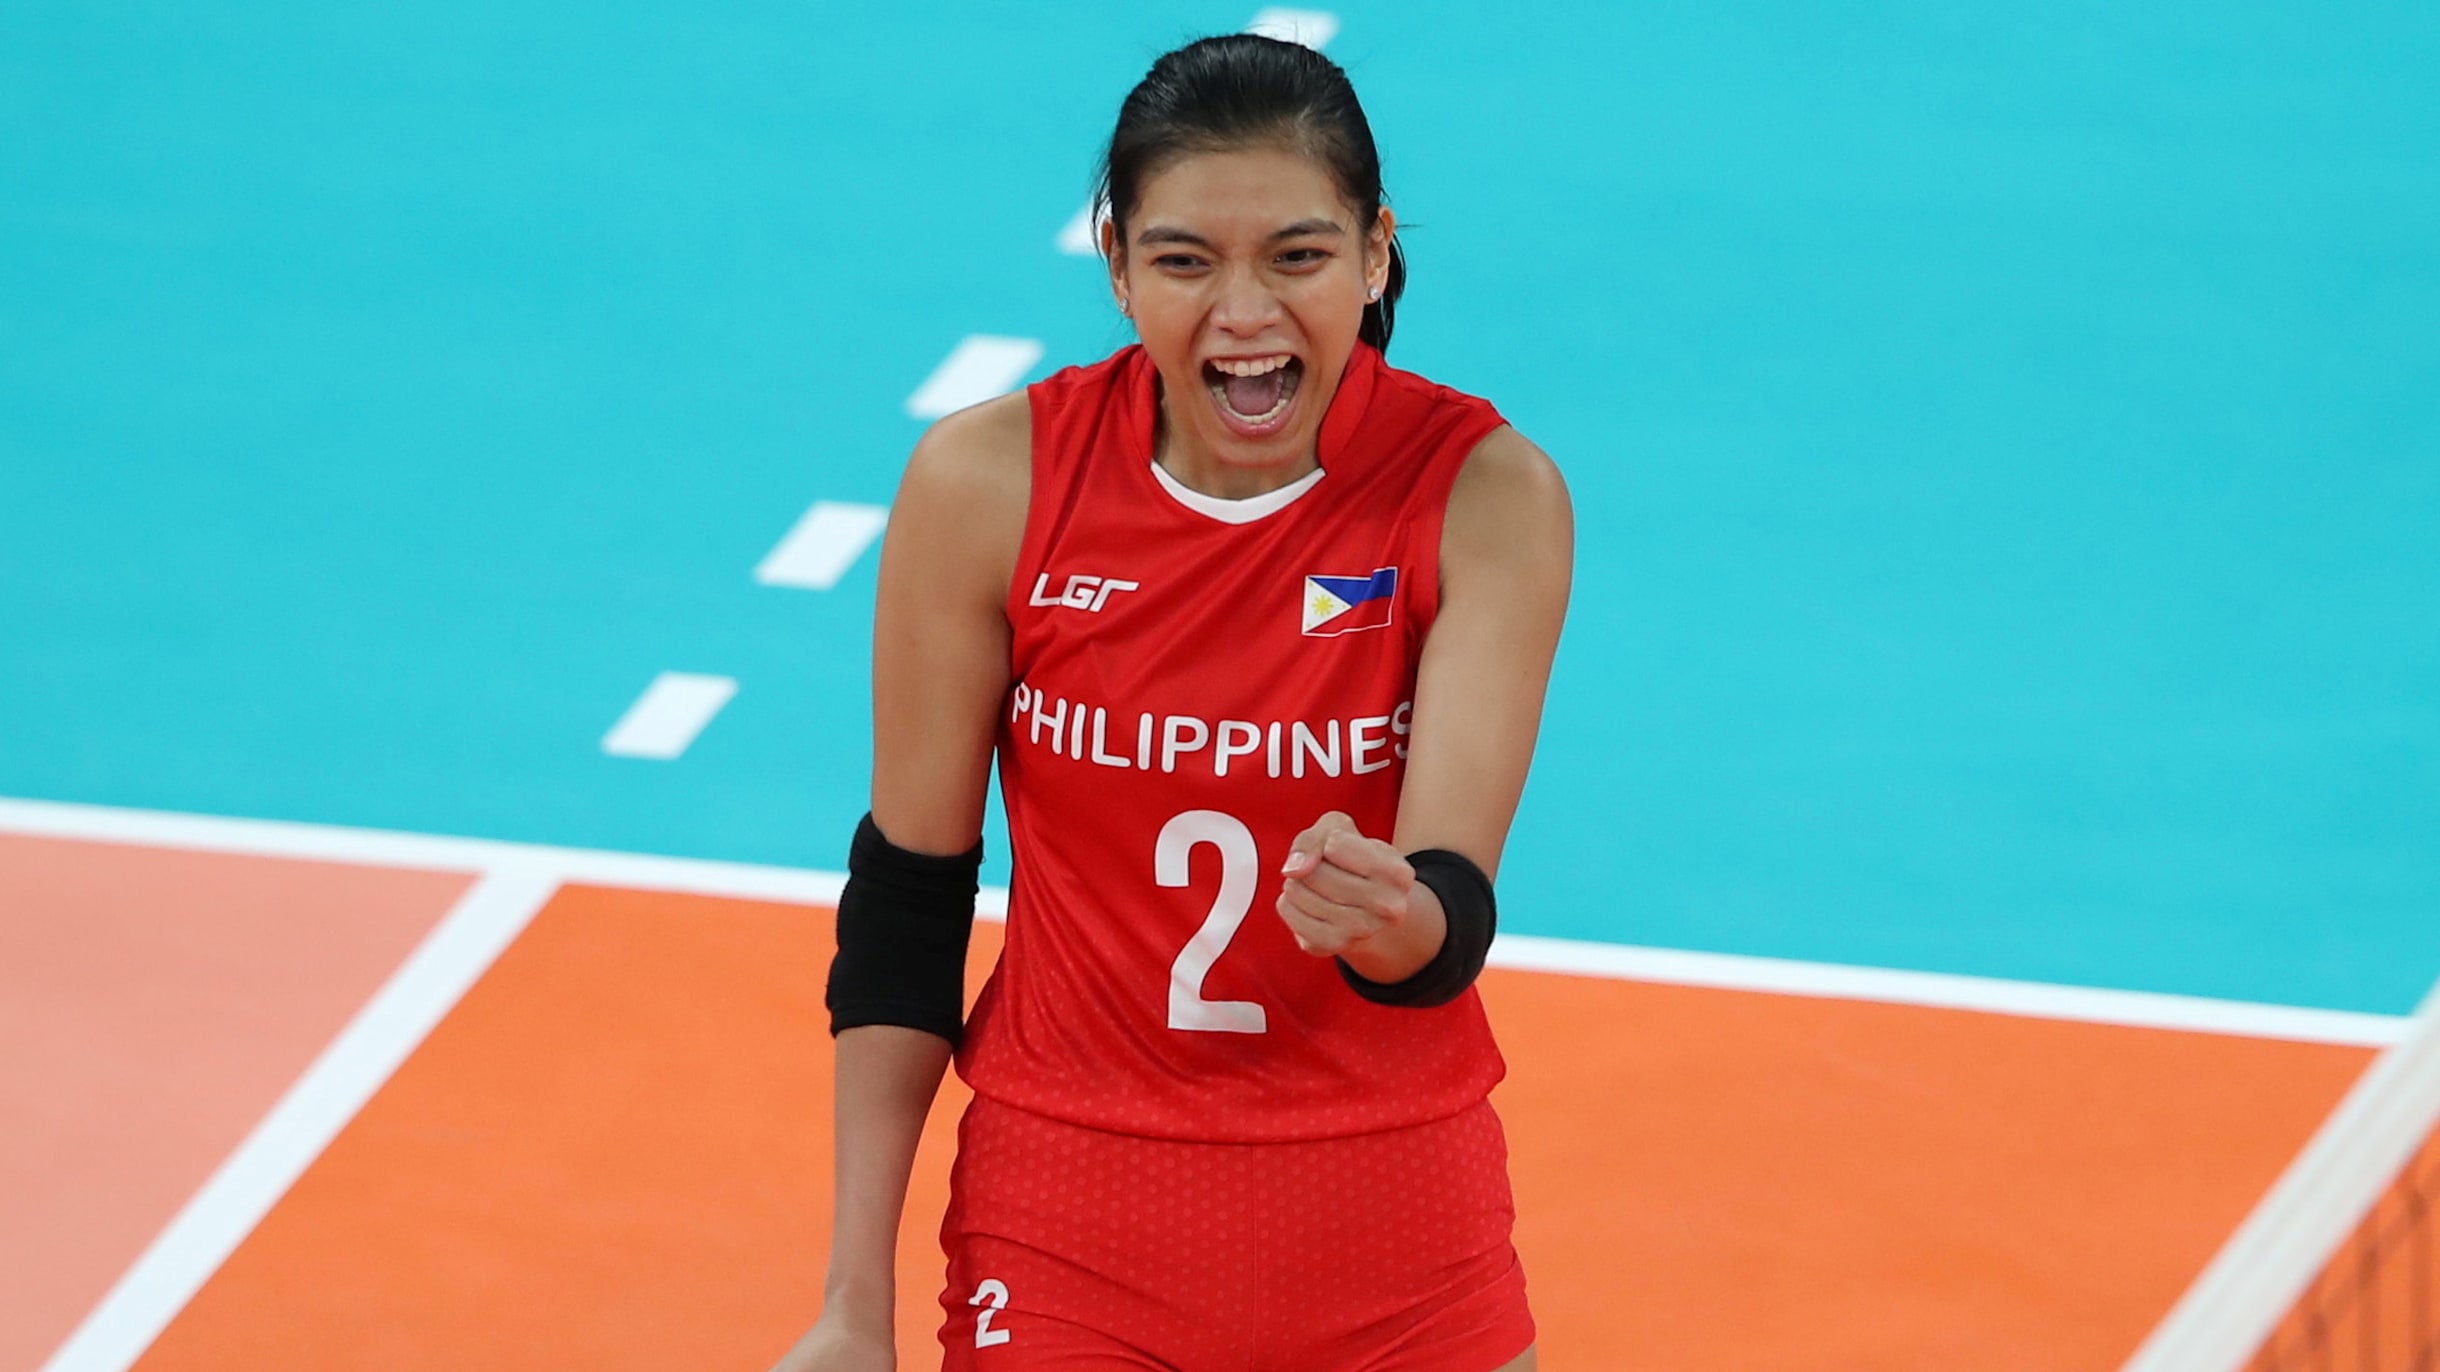 volleyball sea games 2022 live streaming